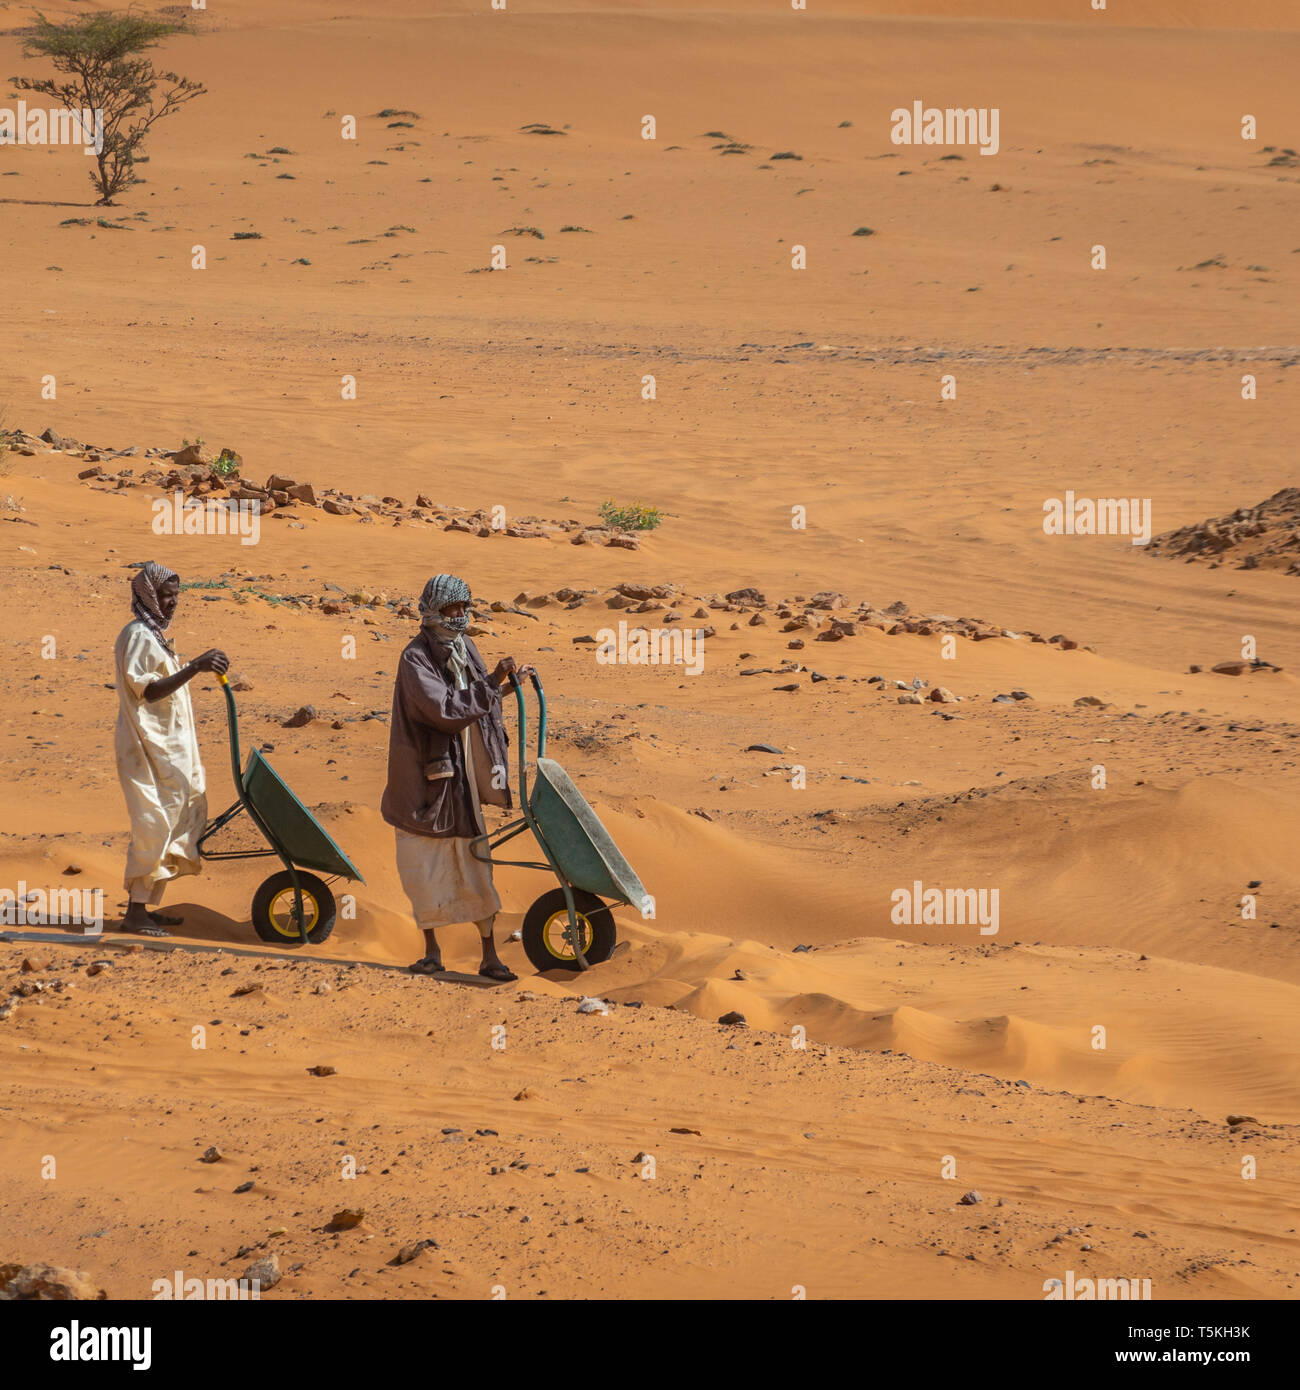 Meroe, Sudan, February 11., 2019: Two local excavation assistants with wheelbarrows during the excavations of Meroe Stock Photo